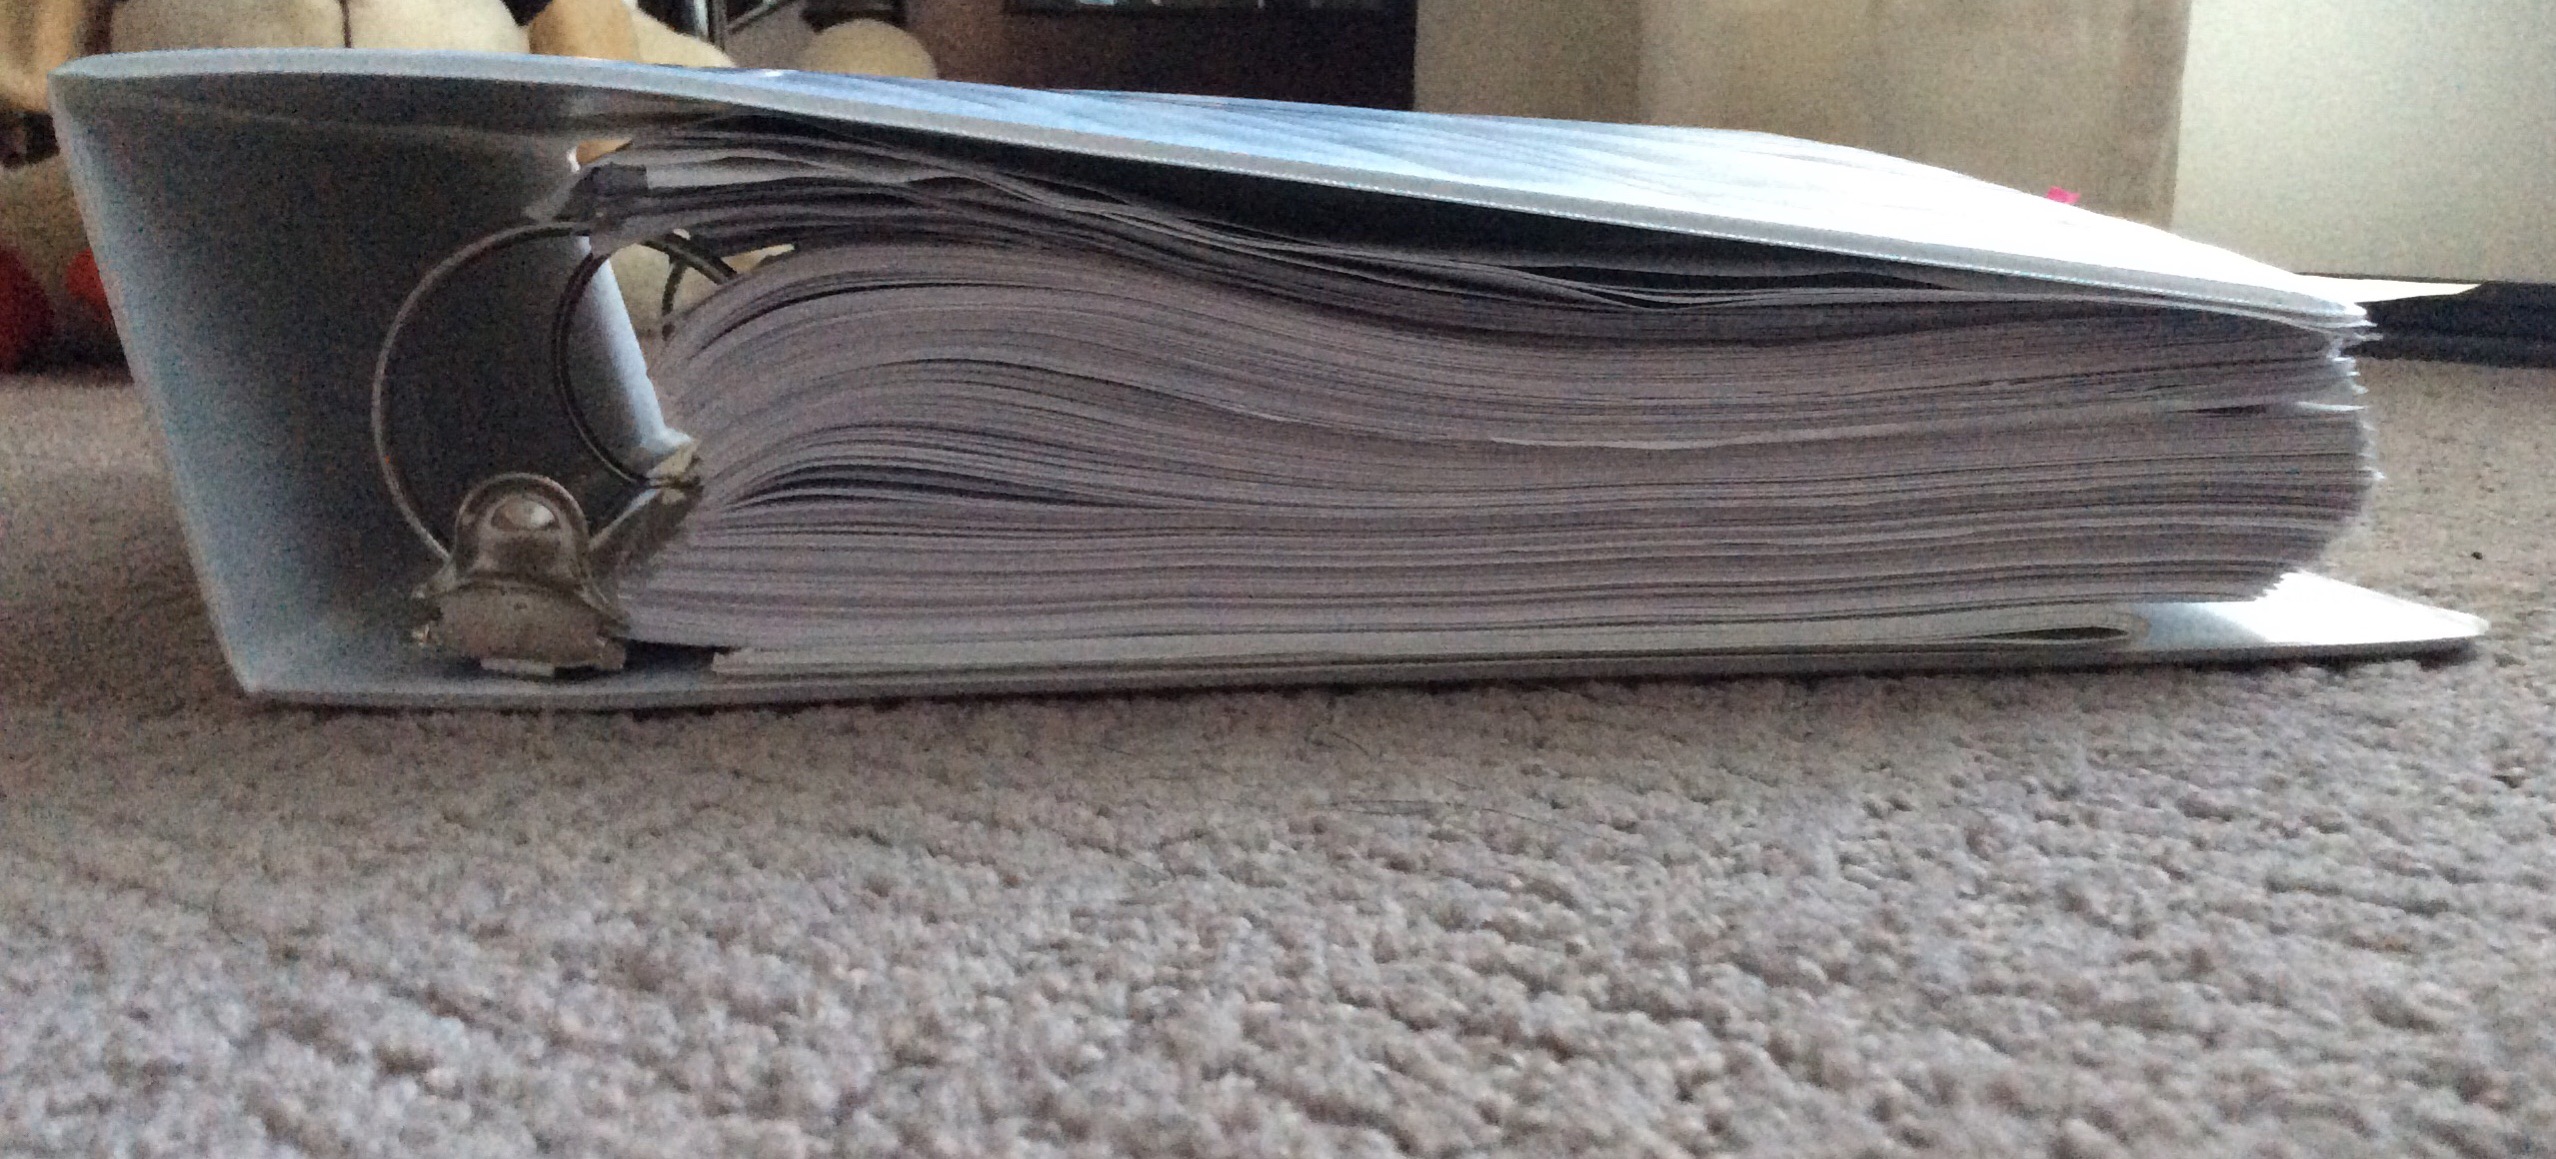 This is the binder. Most all wasn’t submitted.